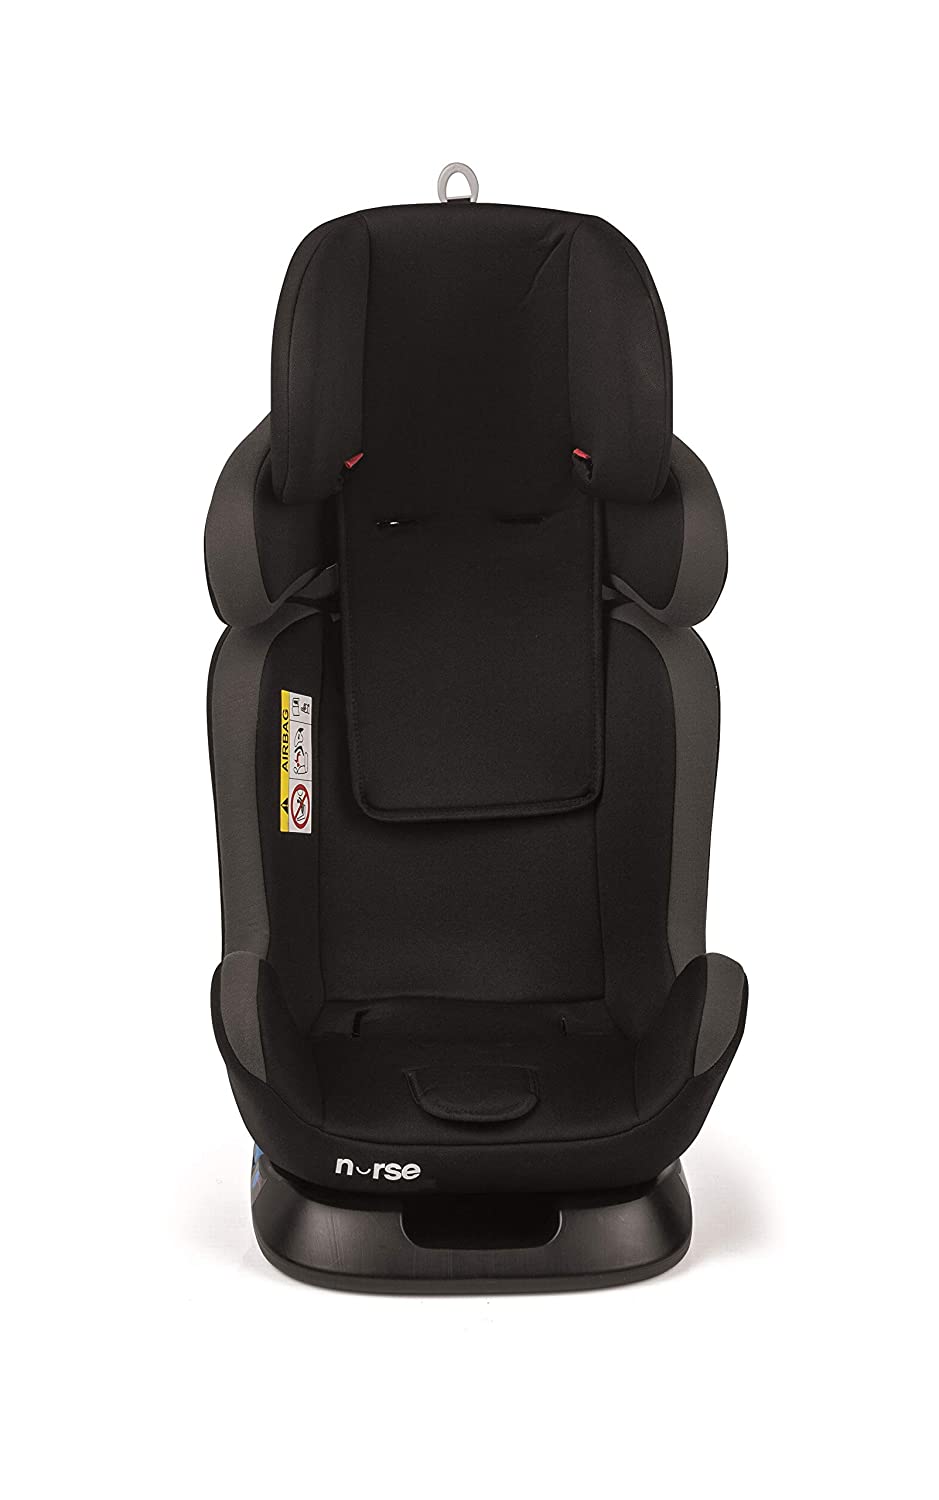 Nurse by Jané Shield 7013 487 Child Seat Group 0 1 2 3 from 0 to 36 kg Installation with Vehicle Belt Maximum Recline with Seat Reducer Black 6.3 kg